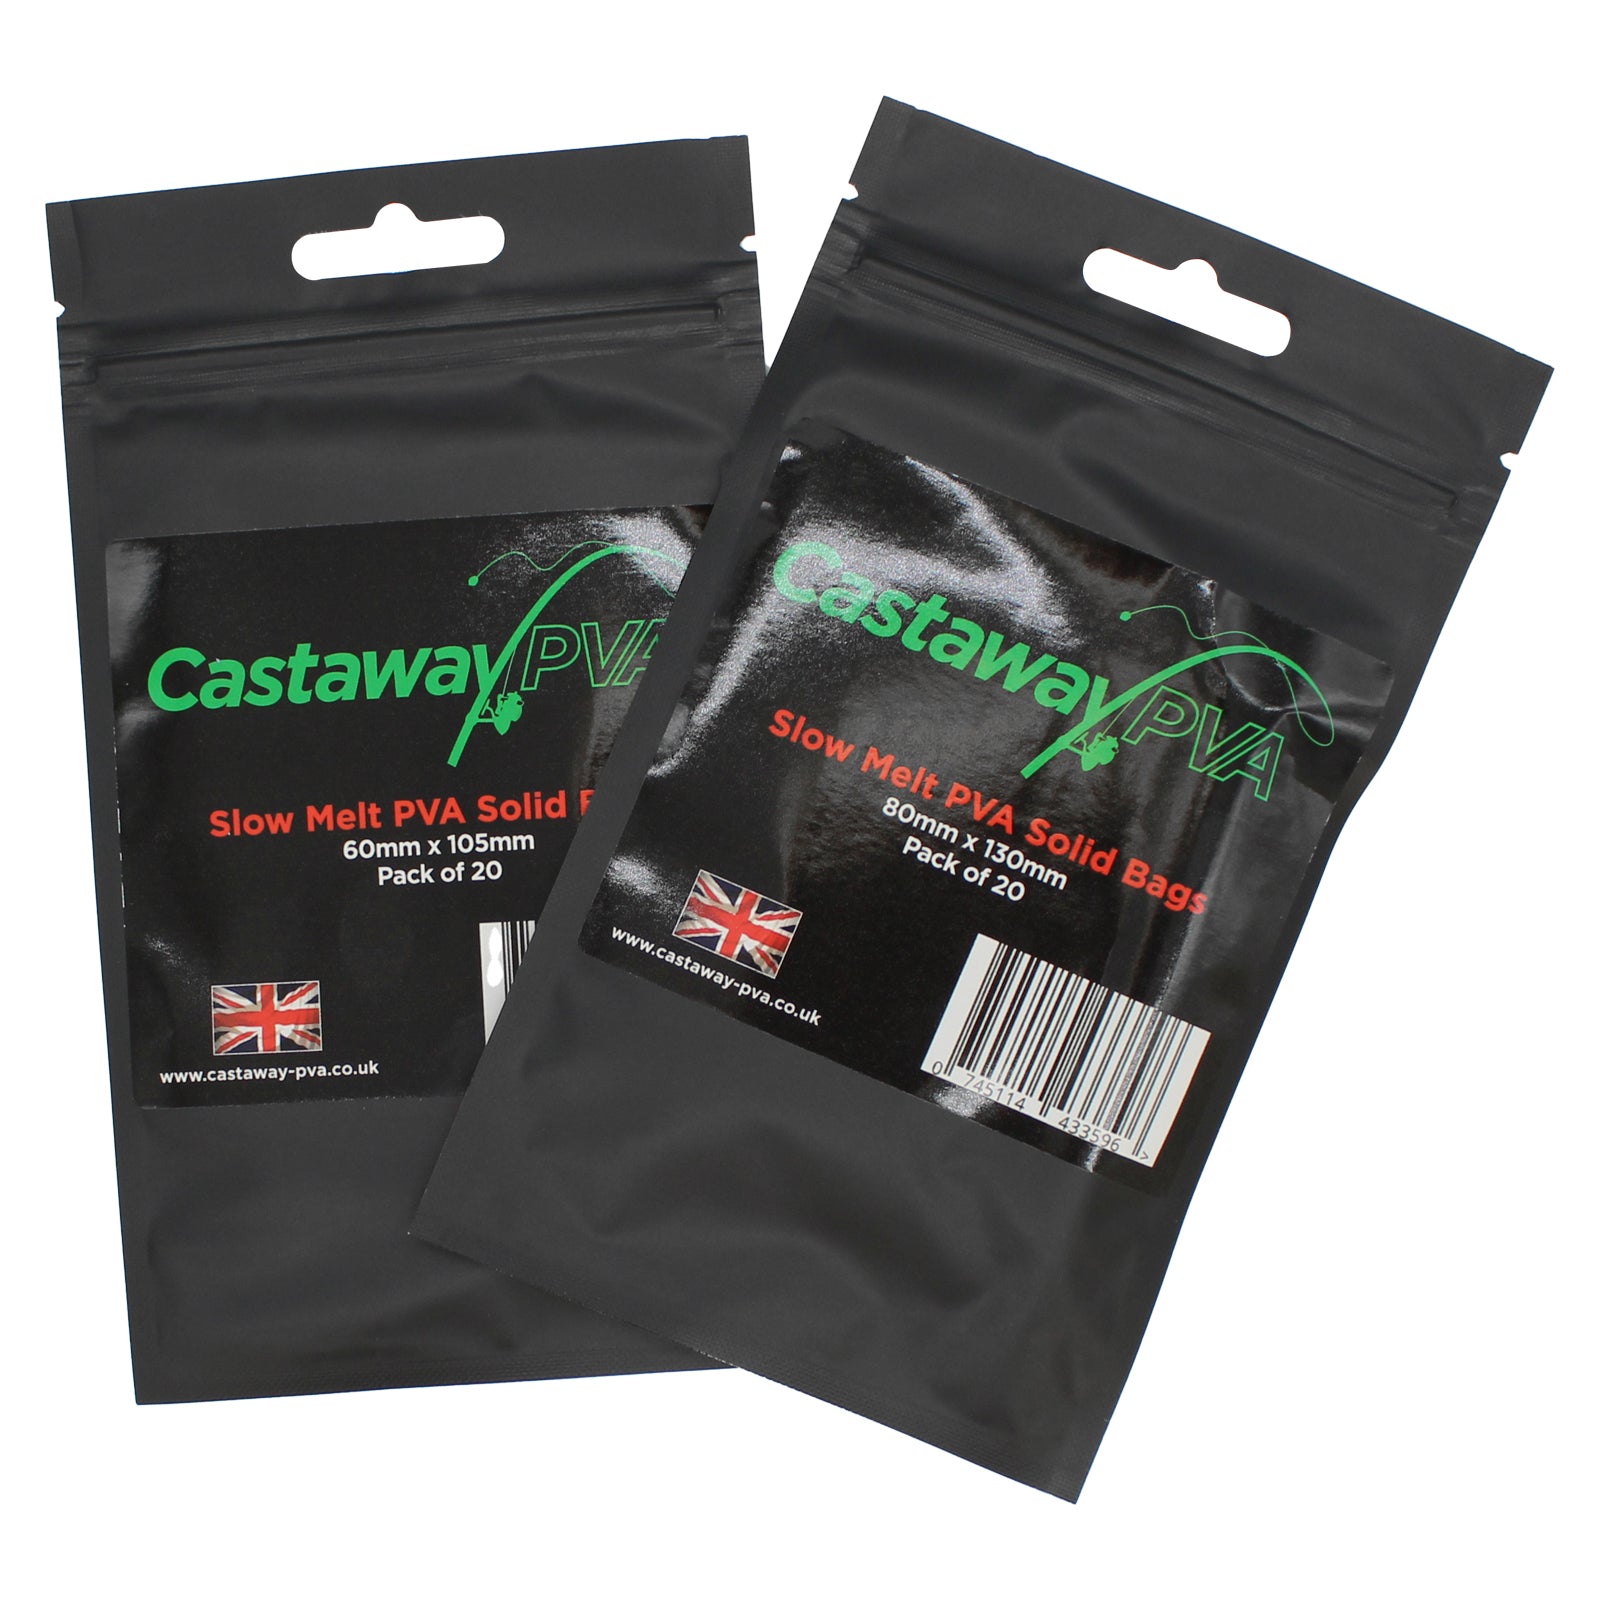 Castaway PVA Slow Melt PVA Solid Bags in Two Sizes